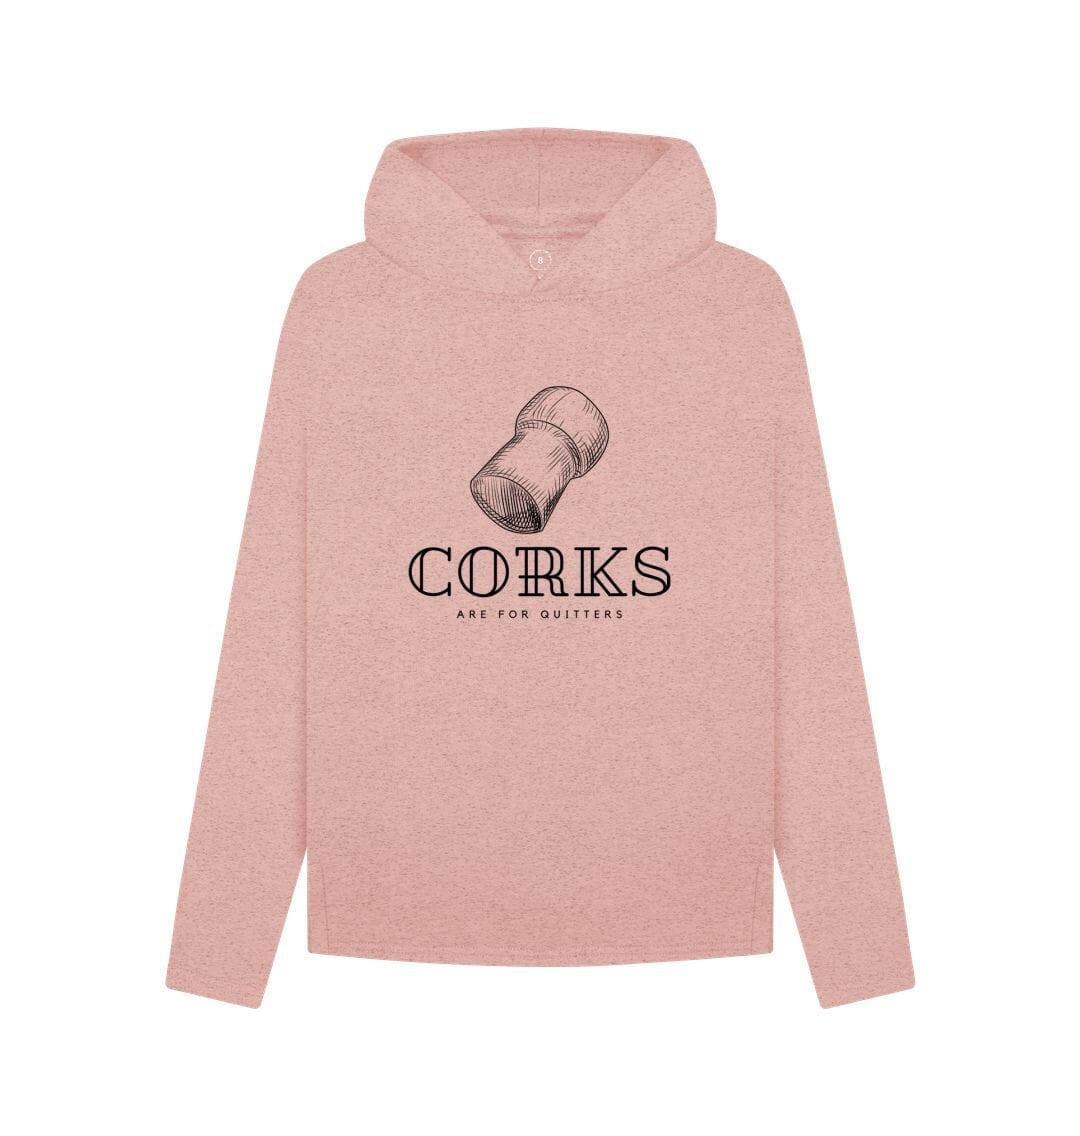 Corks are for Quitters Hoodie Recycled Hoody Online Wine Tasting Club Sunset Pink 8 